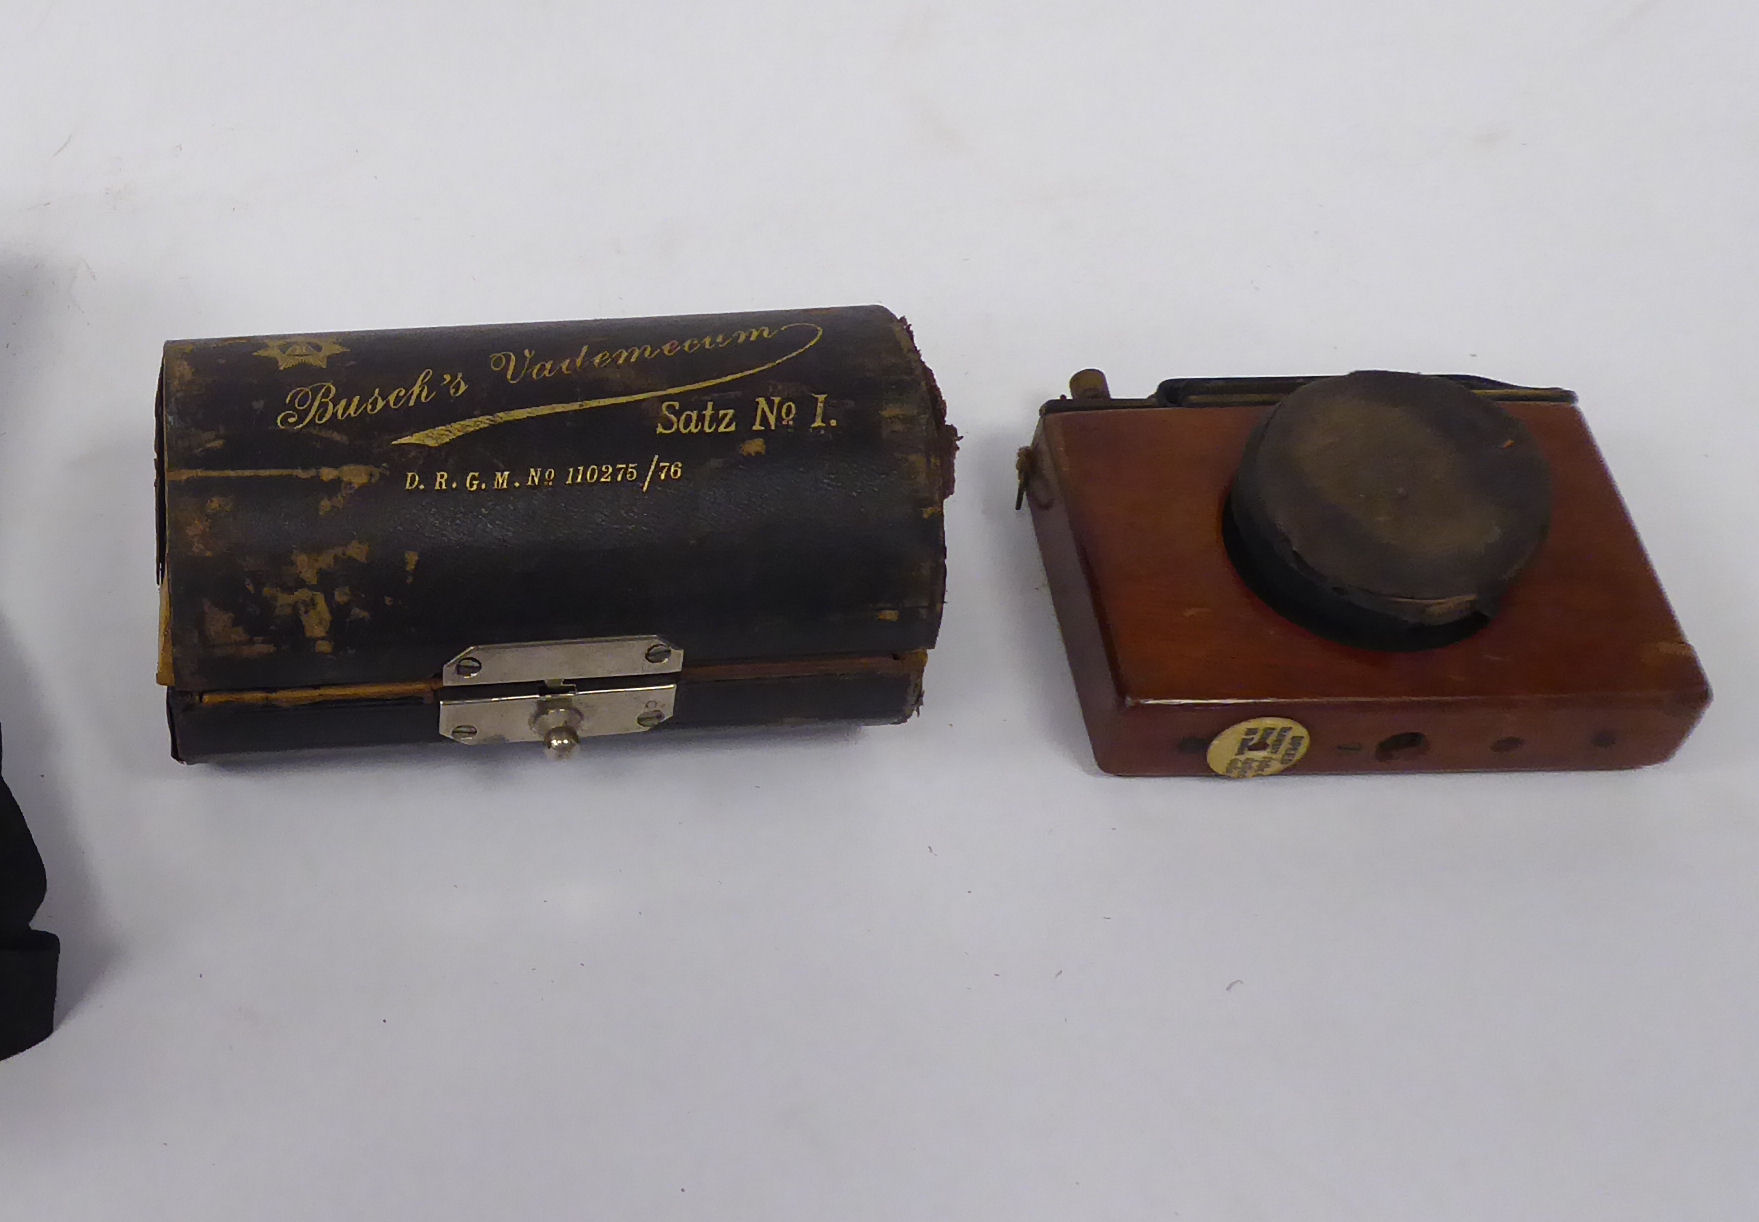 A late 19thC lacquered brass moulded mahogany plate camera with a cased Busch's Vadermecium Satz.No. - Image 7 of 12